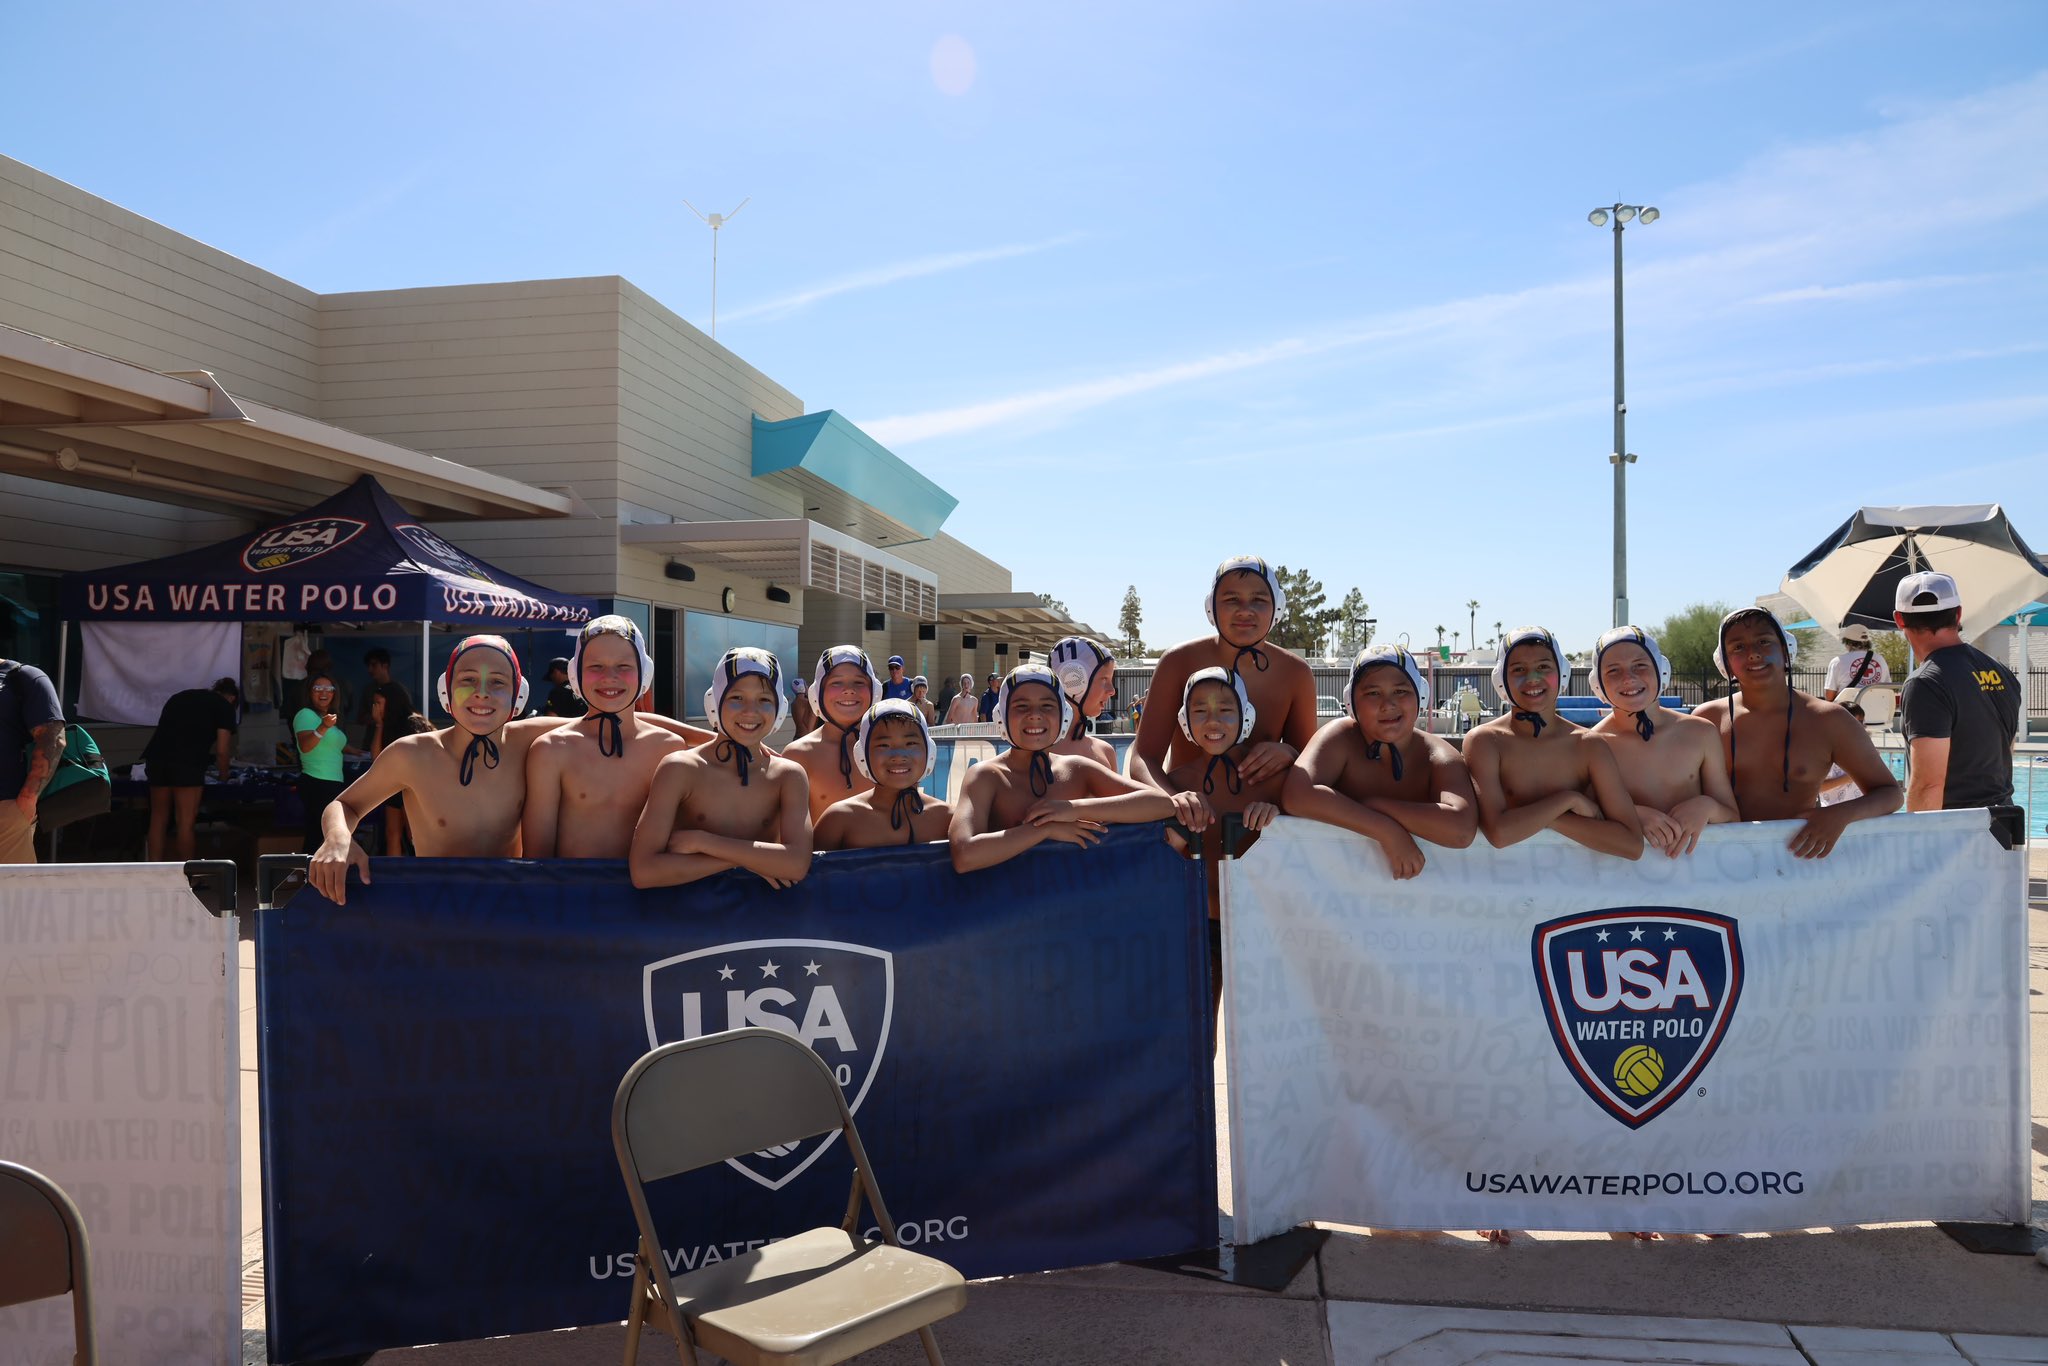 2023 ODP Boys National Championships Complete; NTSC Selections